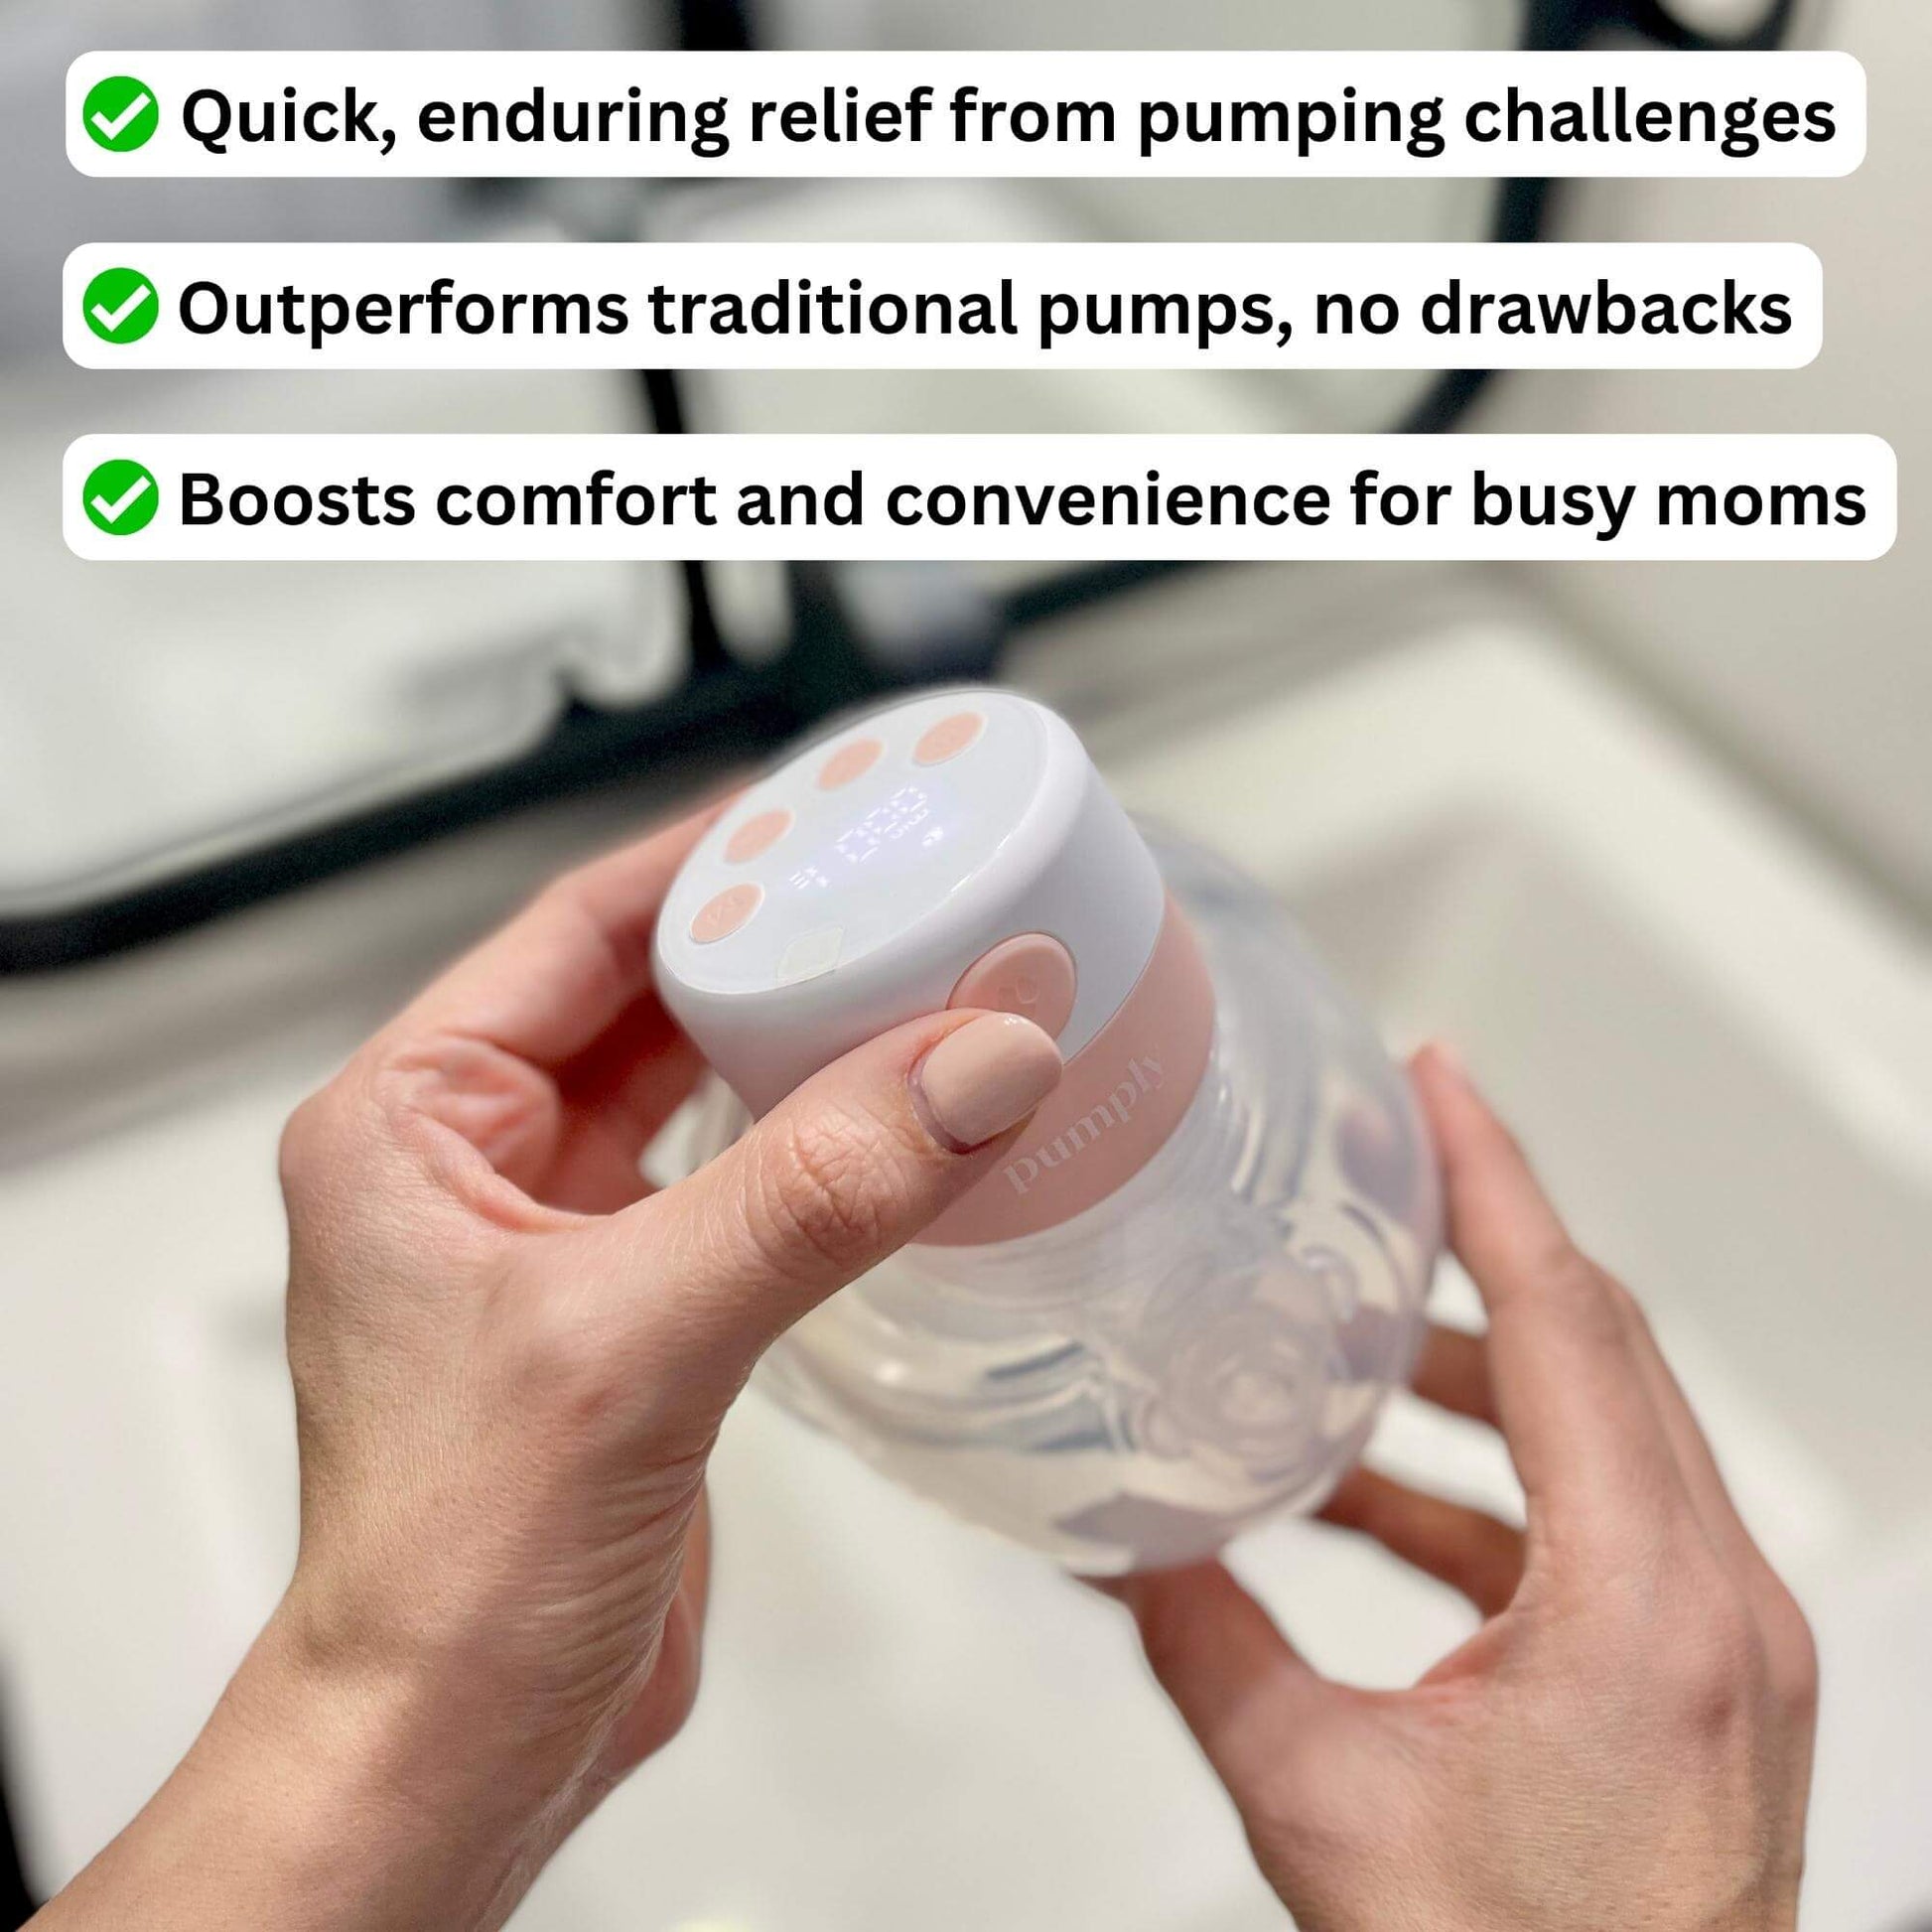 Philips Avent Electric Breast Pump review - Breast pumps - Feeding Products